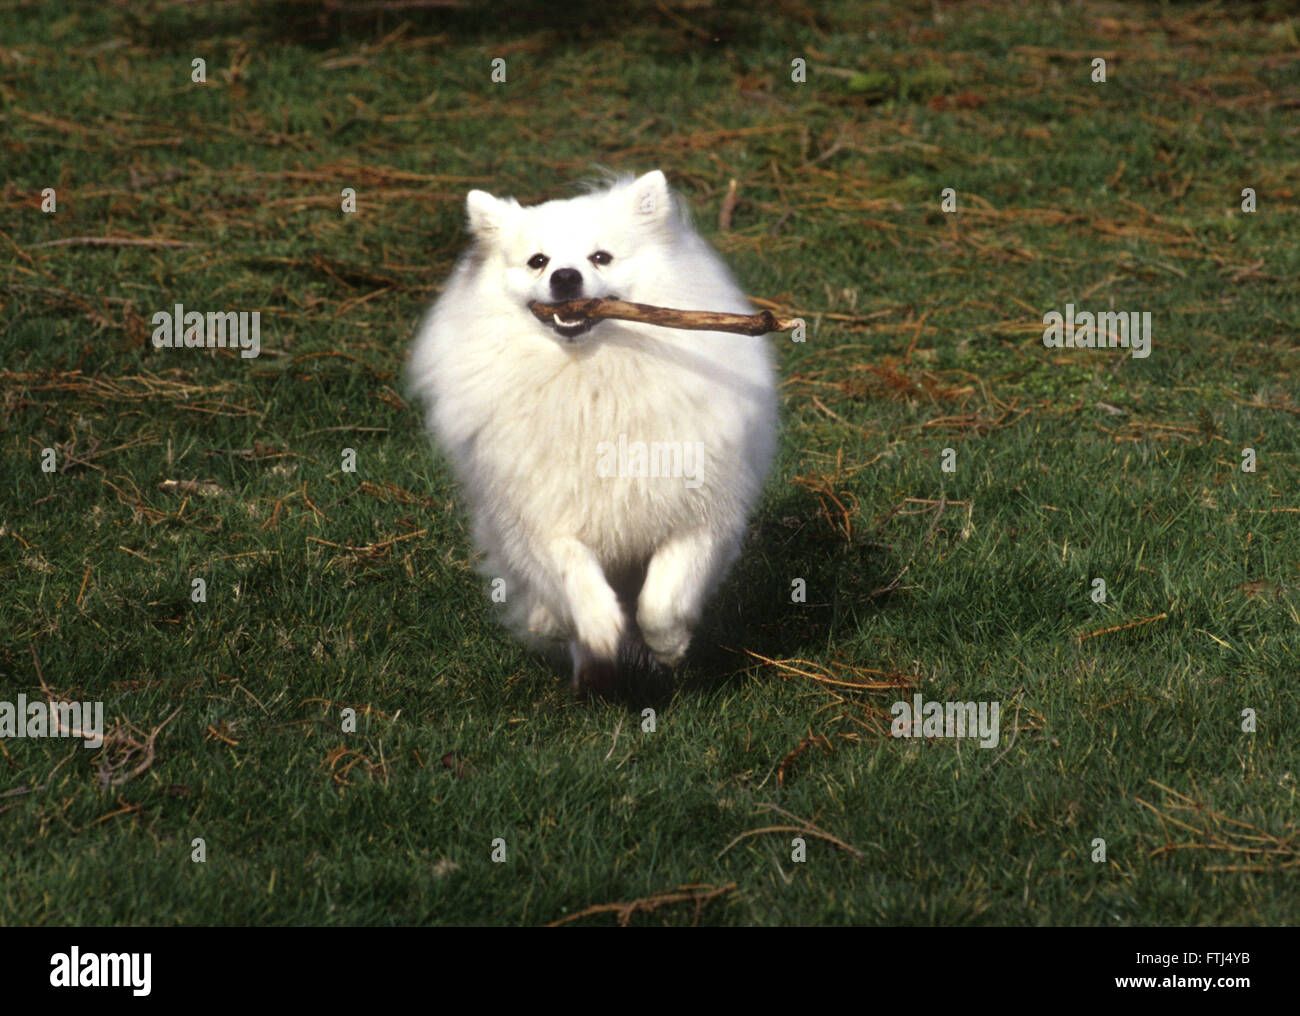 American Eskimo dog running with stick in mouth towards camera Stock Photo